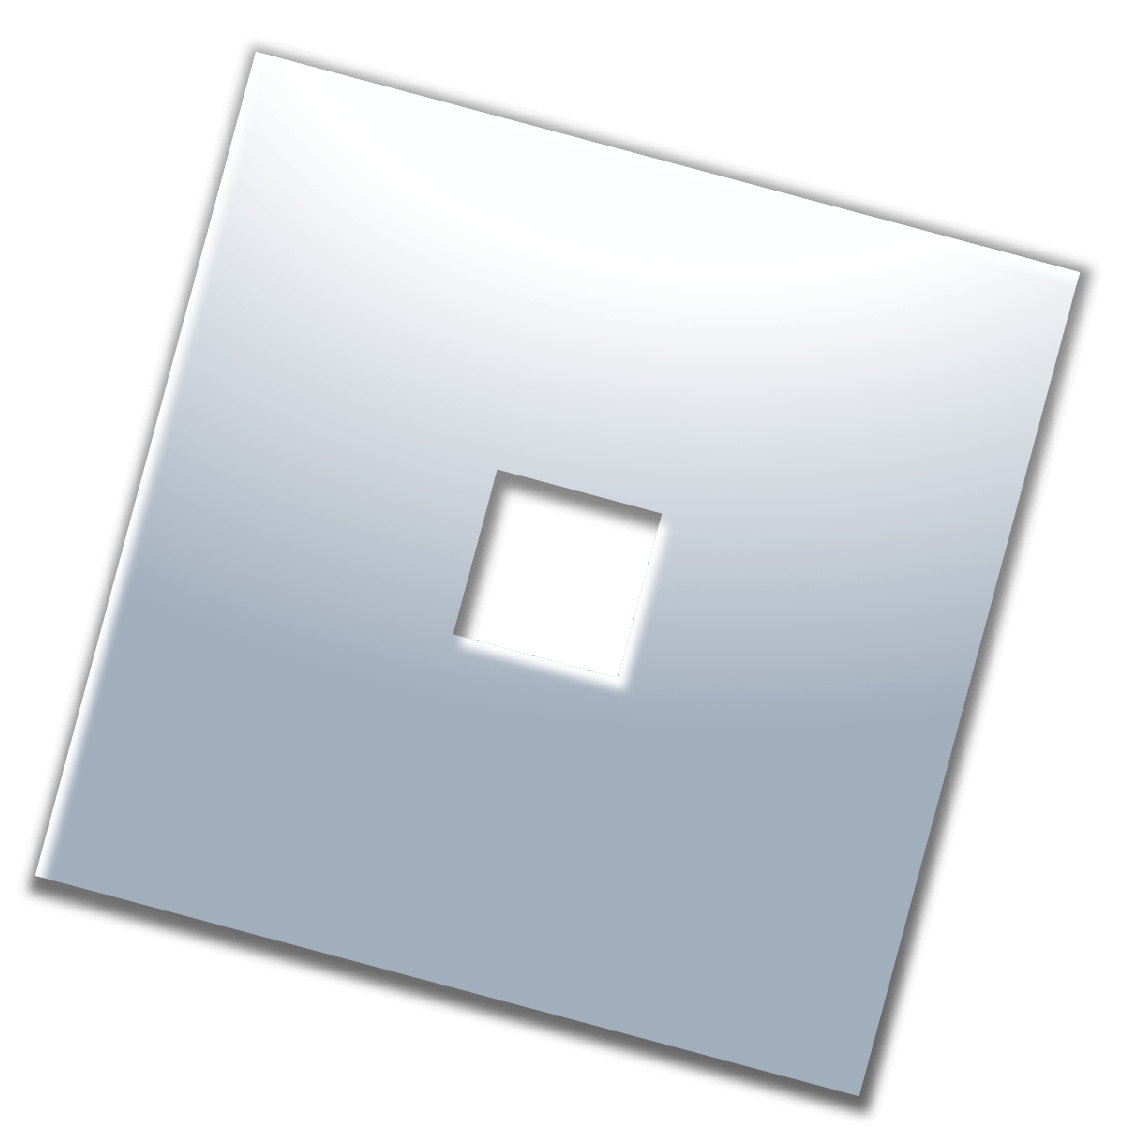 Roblox Logo - PNG and Vector - Logo Download